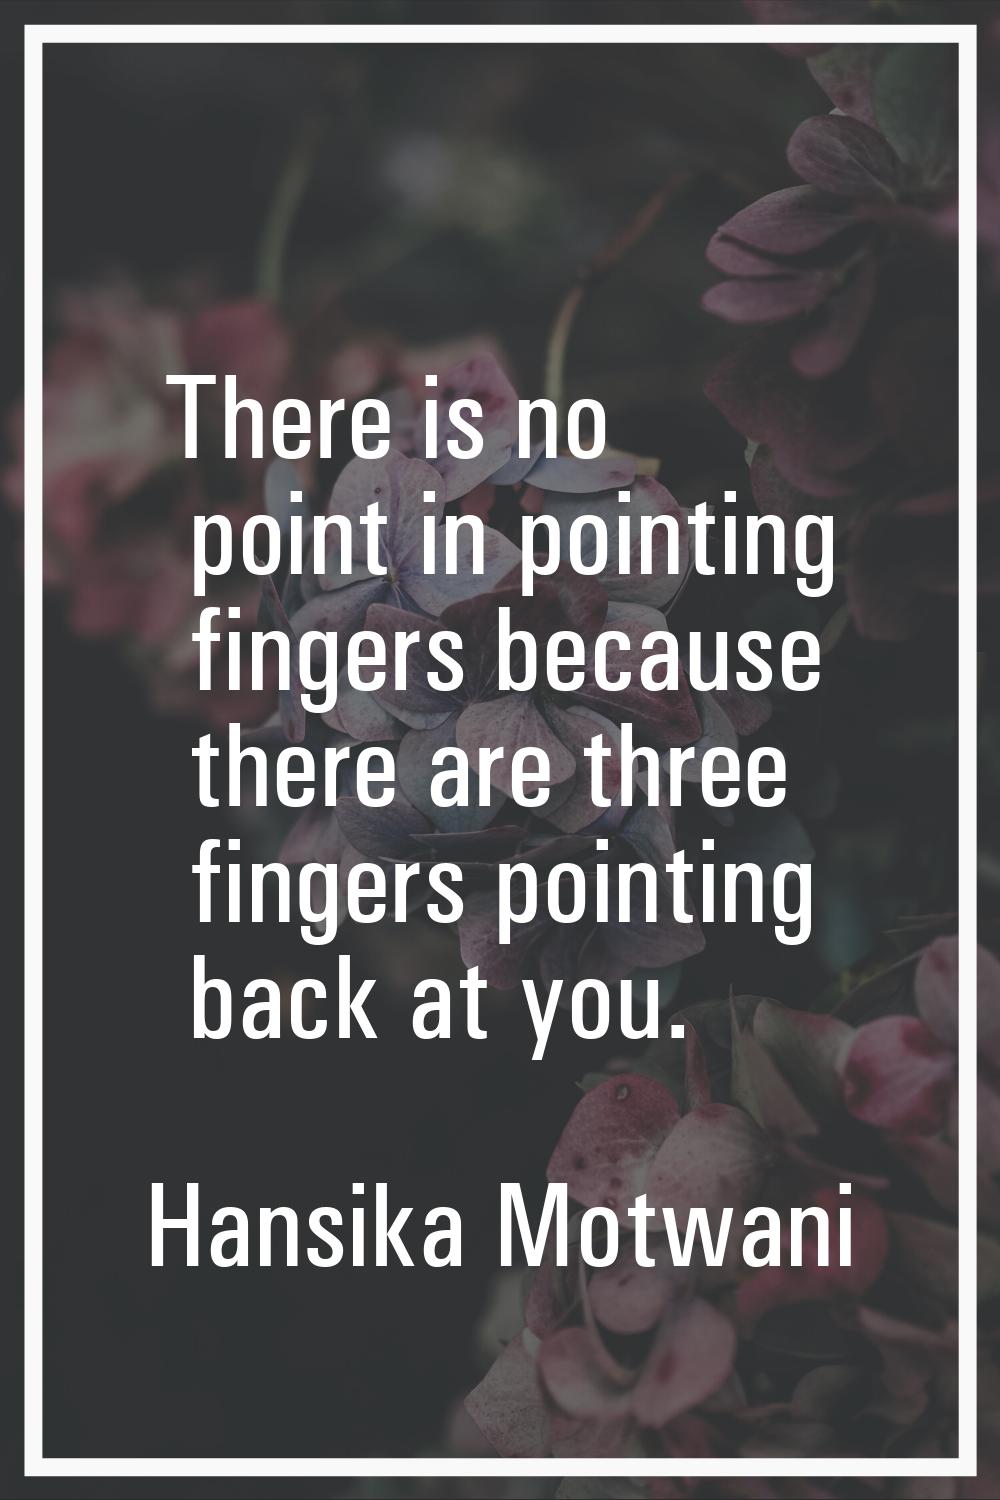 There is no point in pointing fingers because there are three fingers pointing back at you.